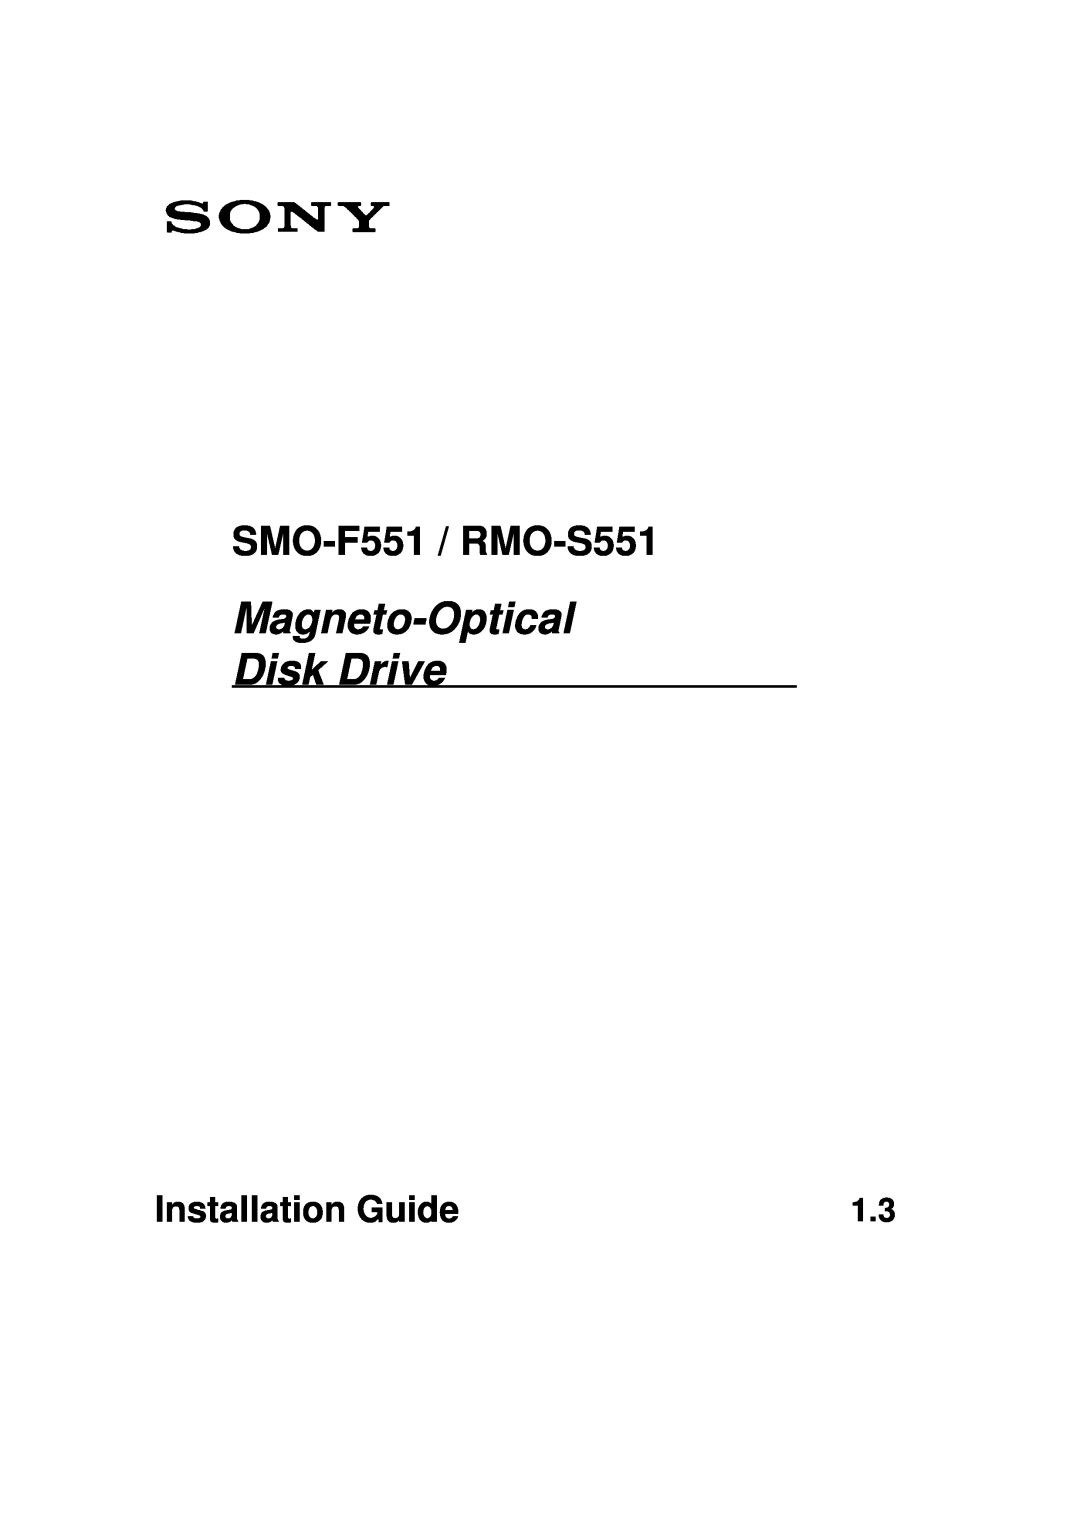 Sony manual Magneto-Optical Disk Drive, SMO-F551 / RMO-S551, Installation Guide 